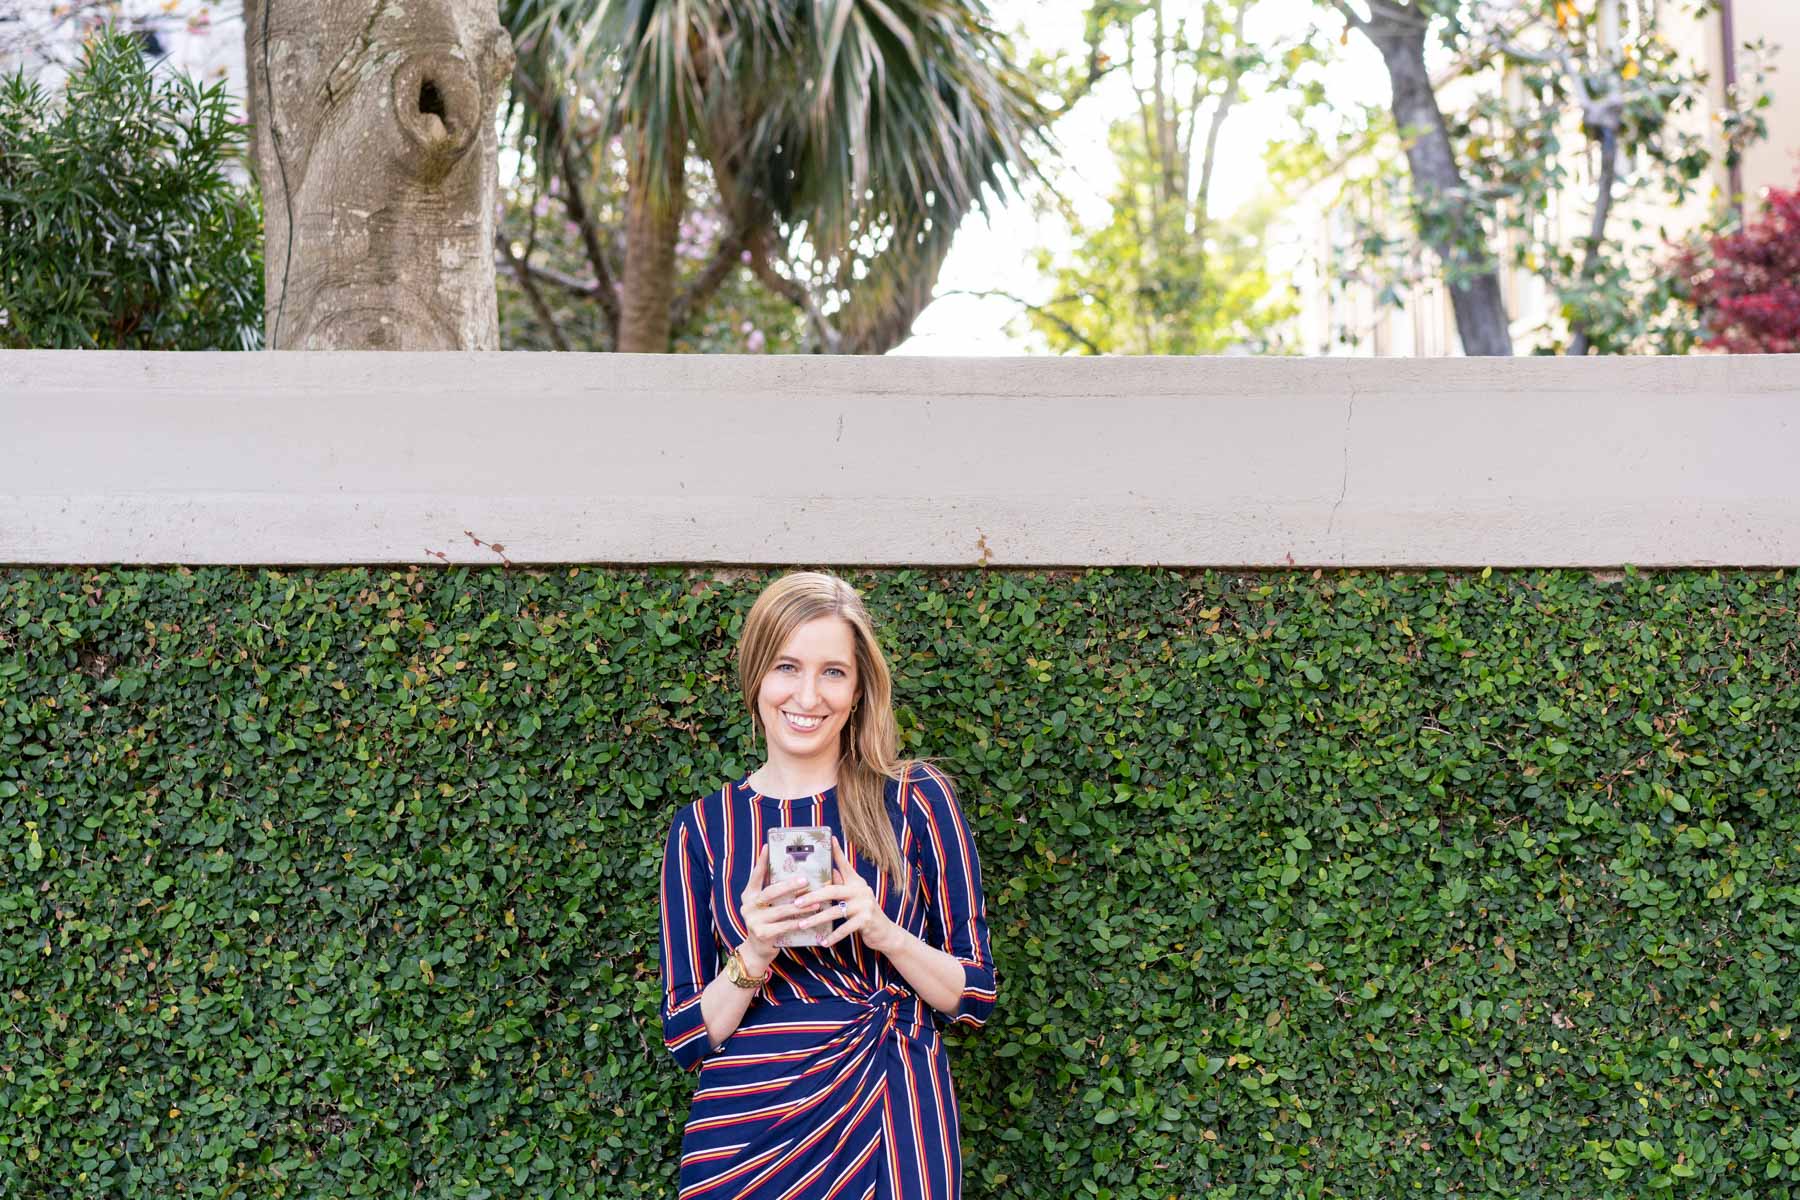 Woman in a striped dress standing against an ivy wall holding her phone and smiling